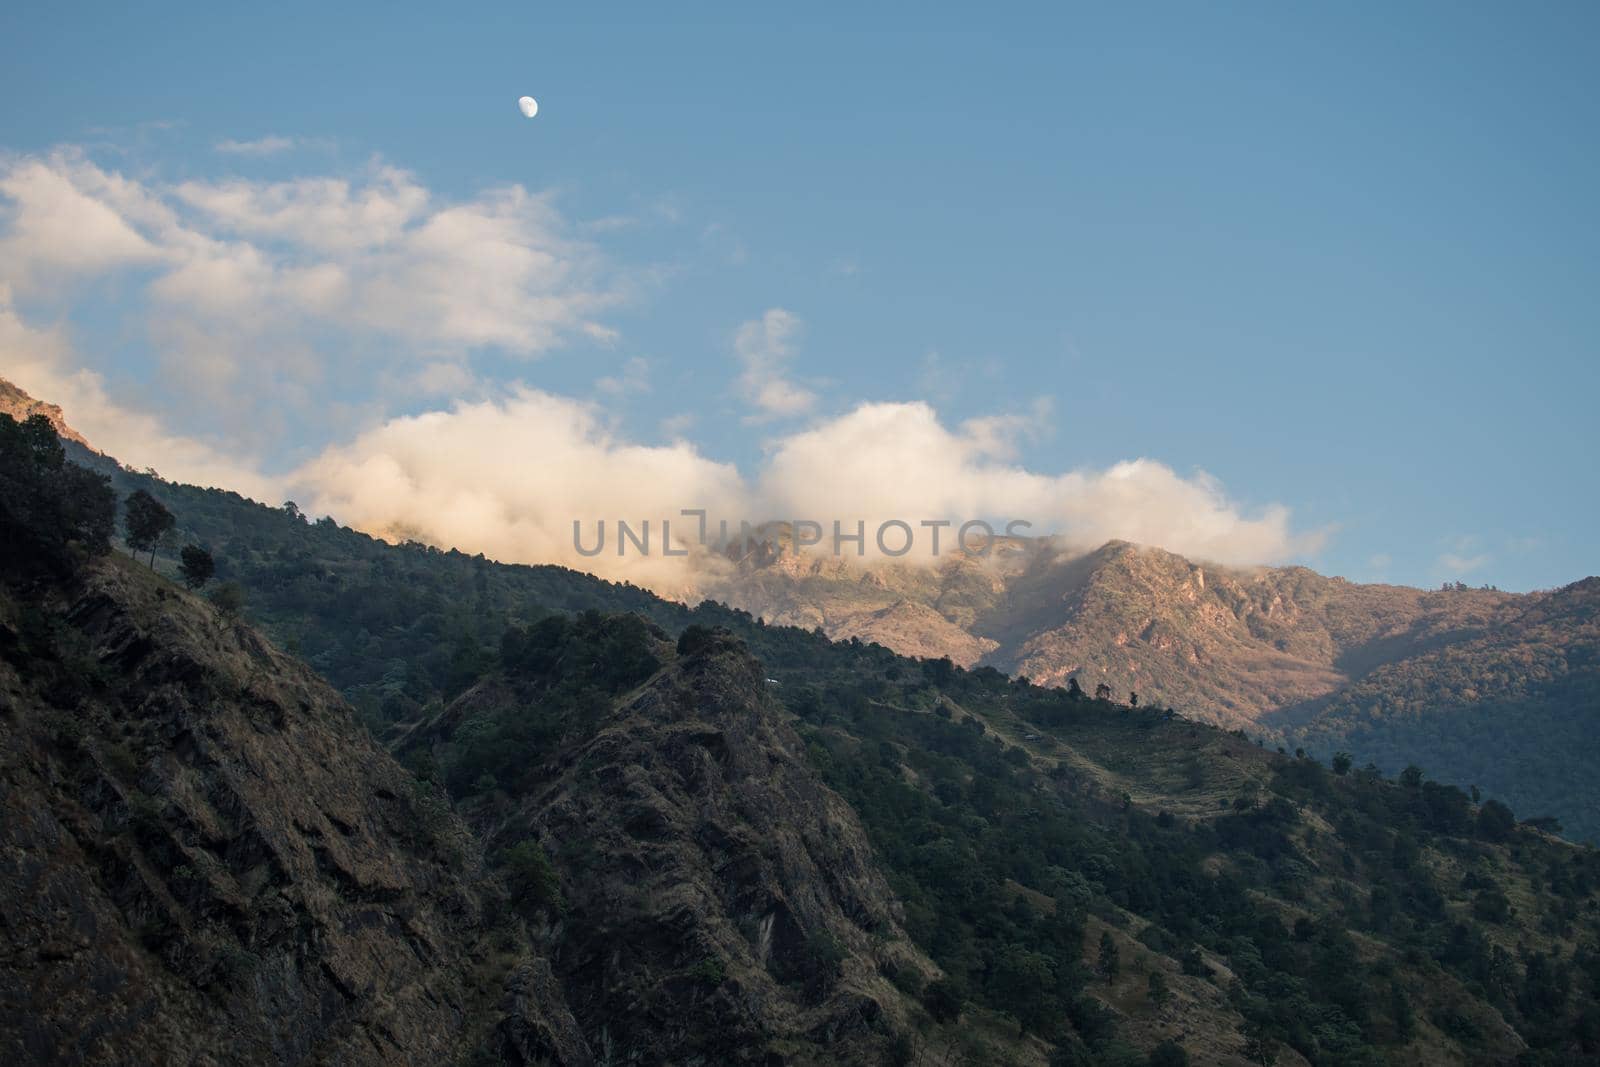 Beautiful scenery with the moon over mountain peaks during the day